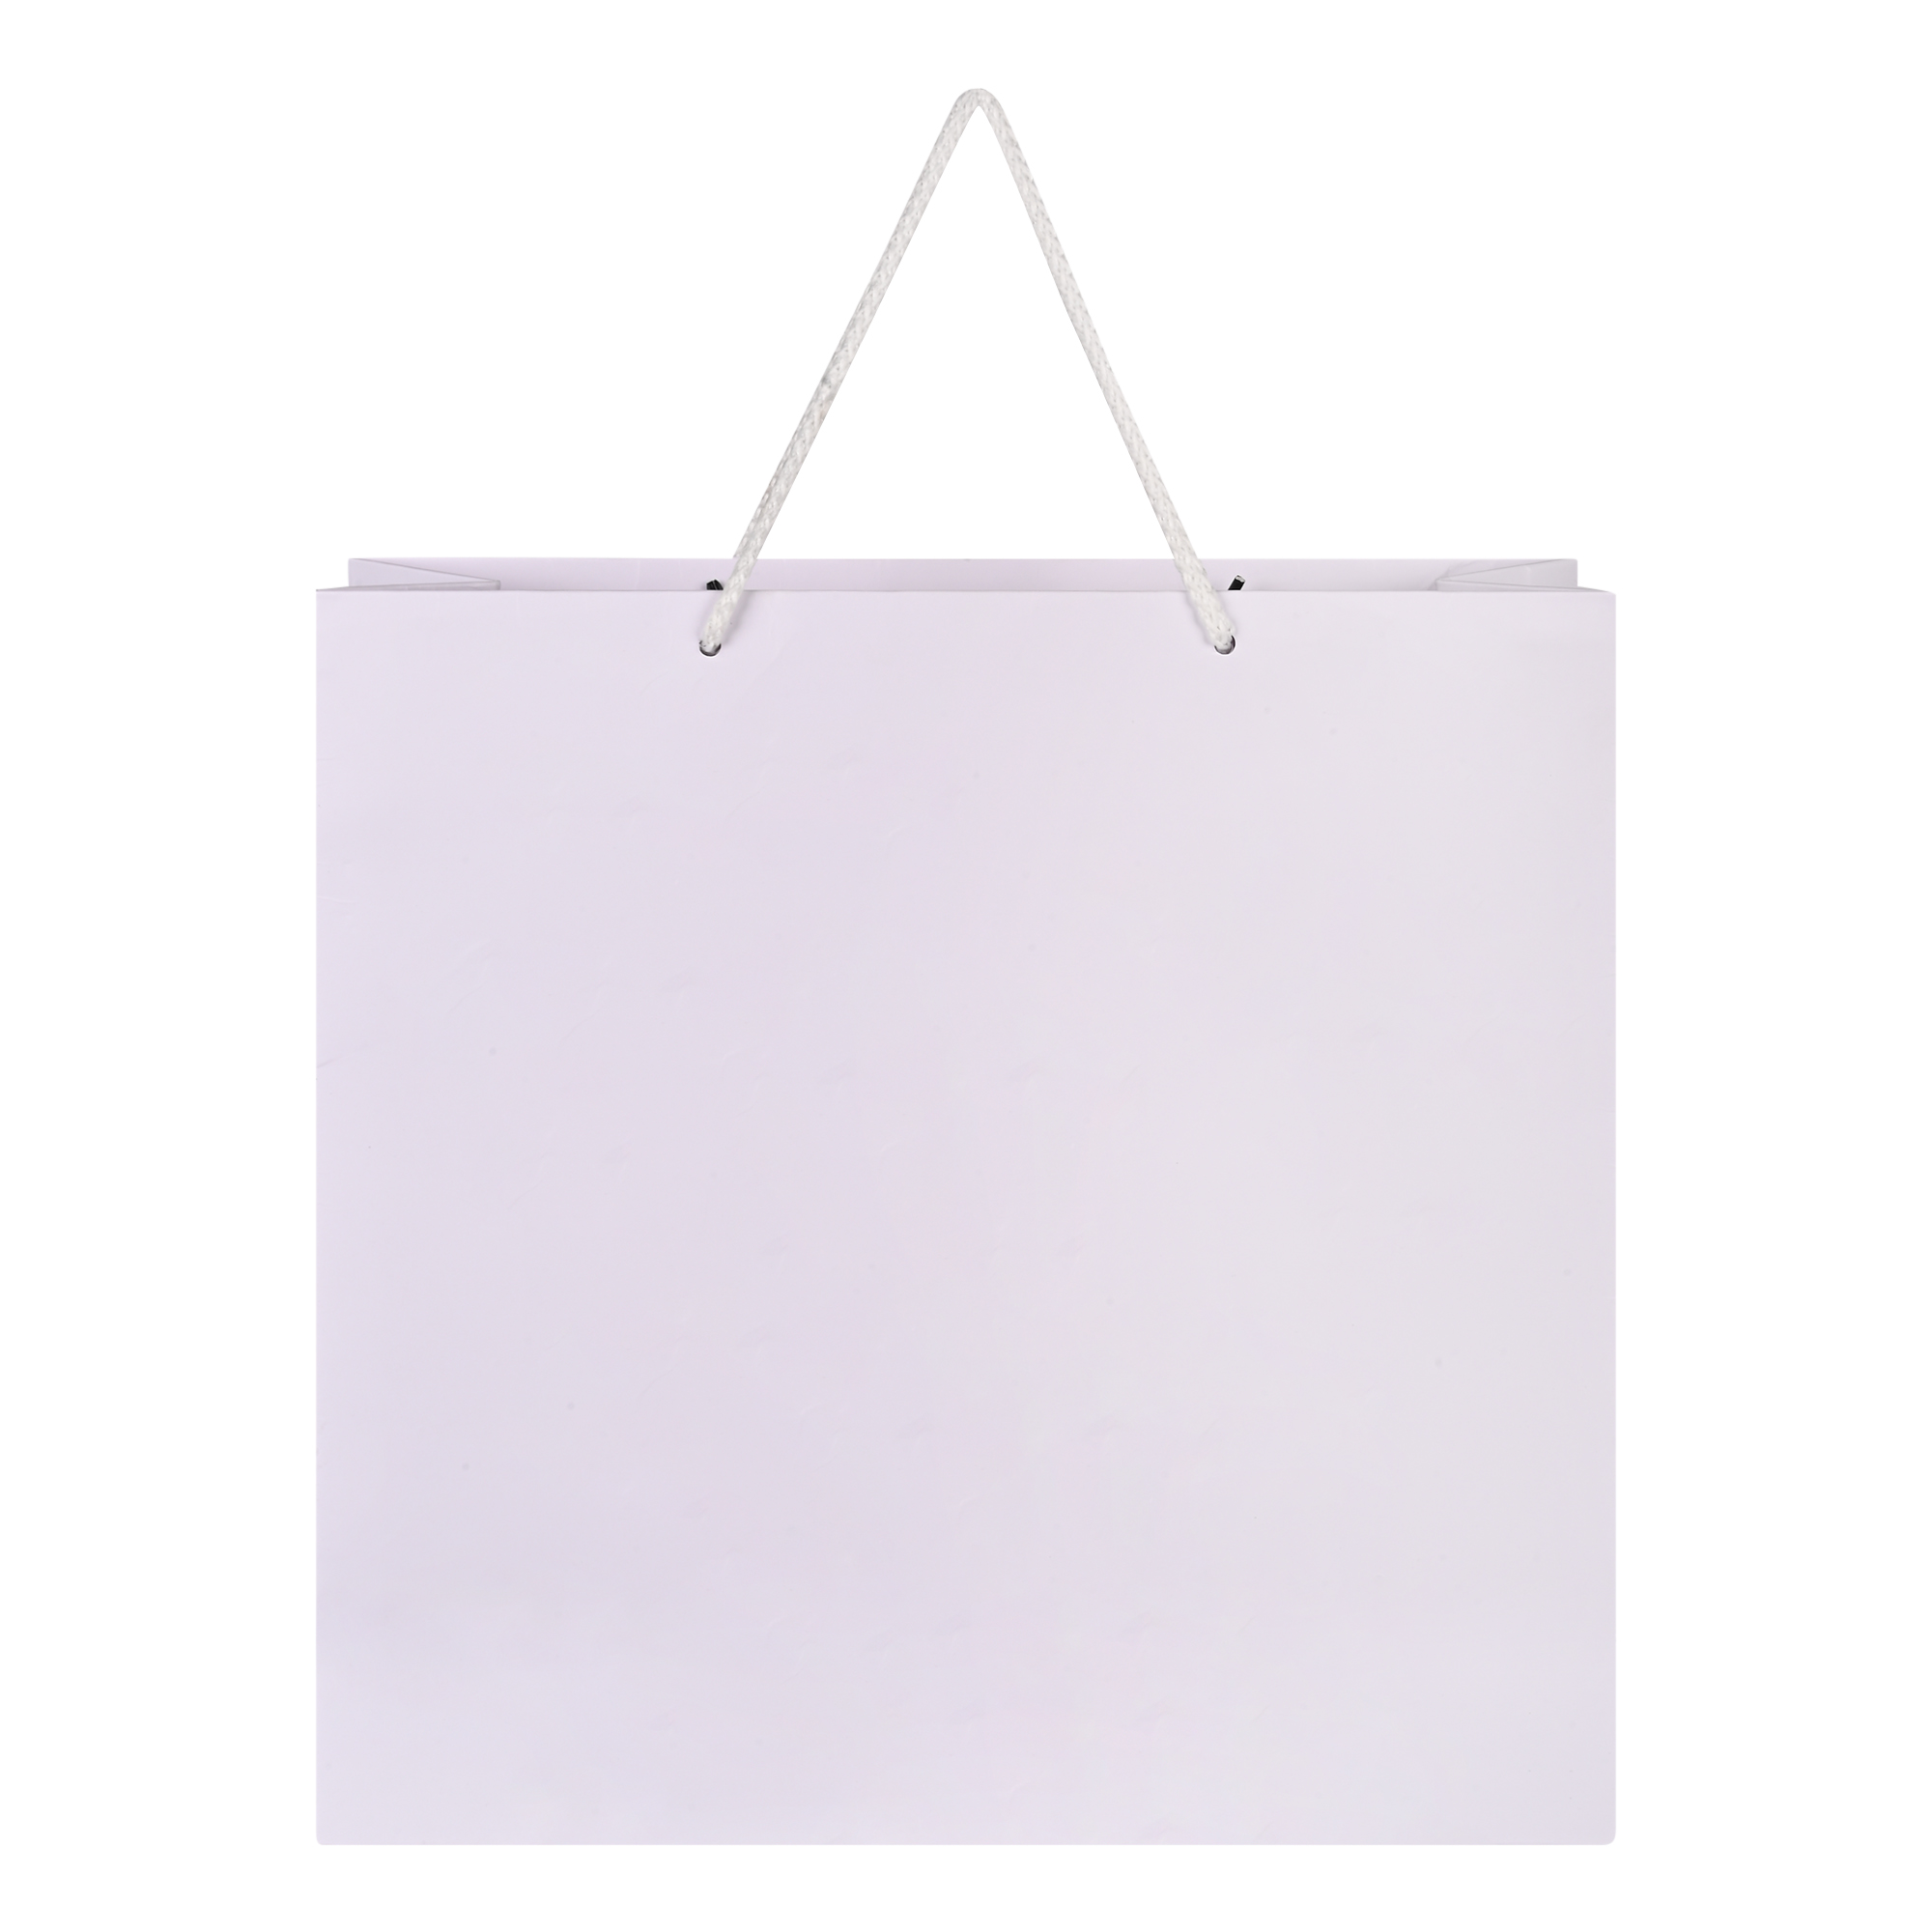 Washable paper bags - large carry bag, short handles | IGRO